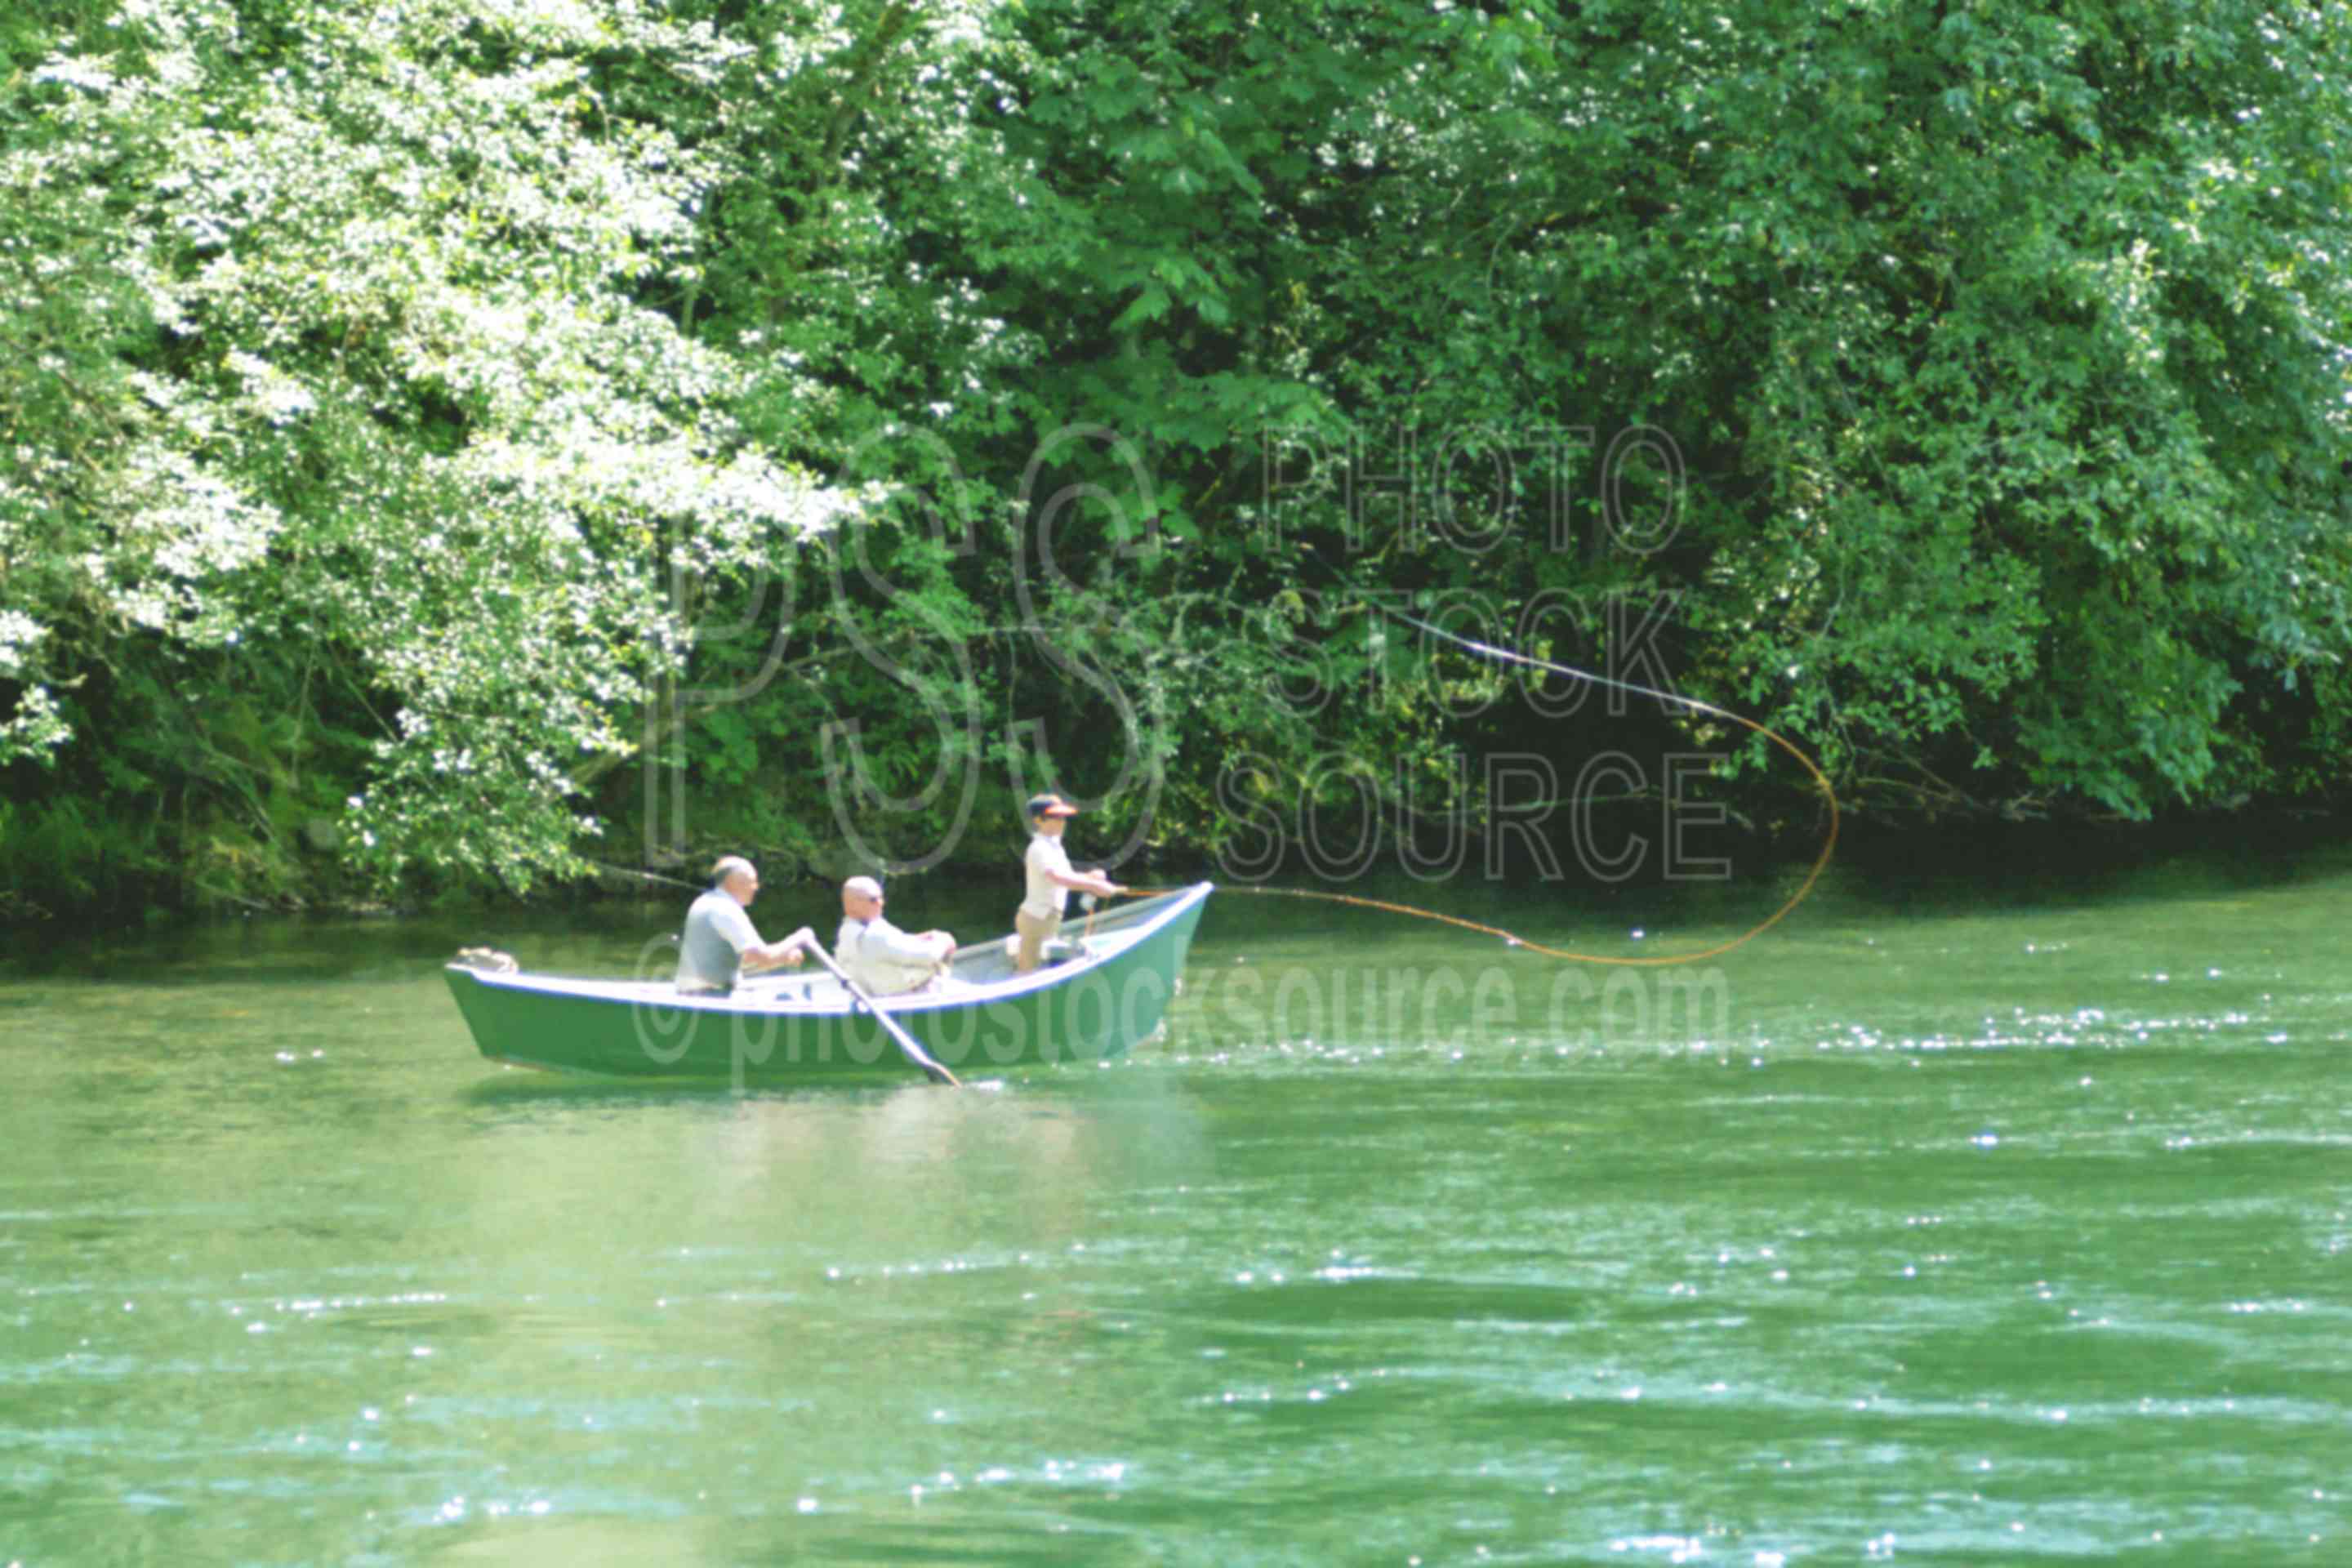 Fly Fishing,fishing,mckenzie river,mckenzie river boat,people,river boat,usas,drift boat,row boat,lakes rivers